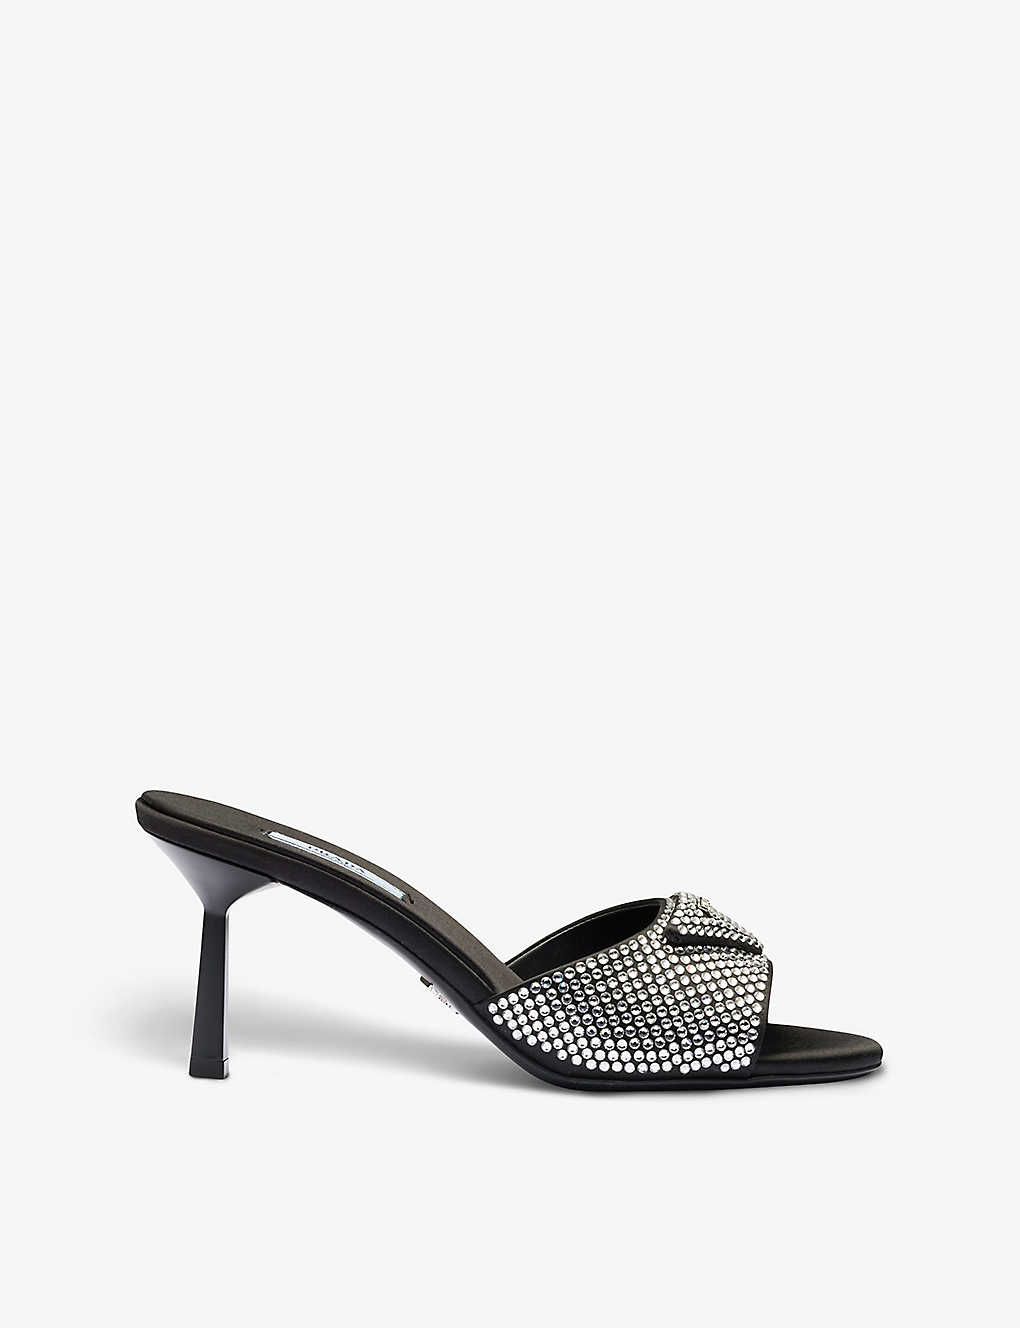 Prada Crystal-embellished Satin And Leather Heeled Sandals In Gold/silver